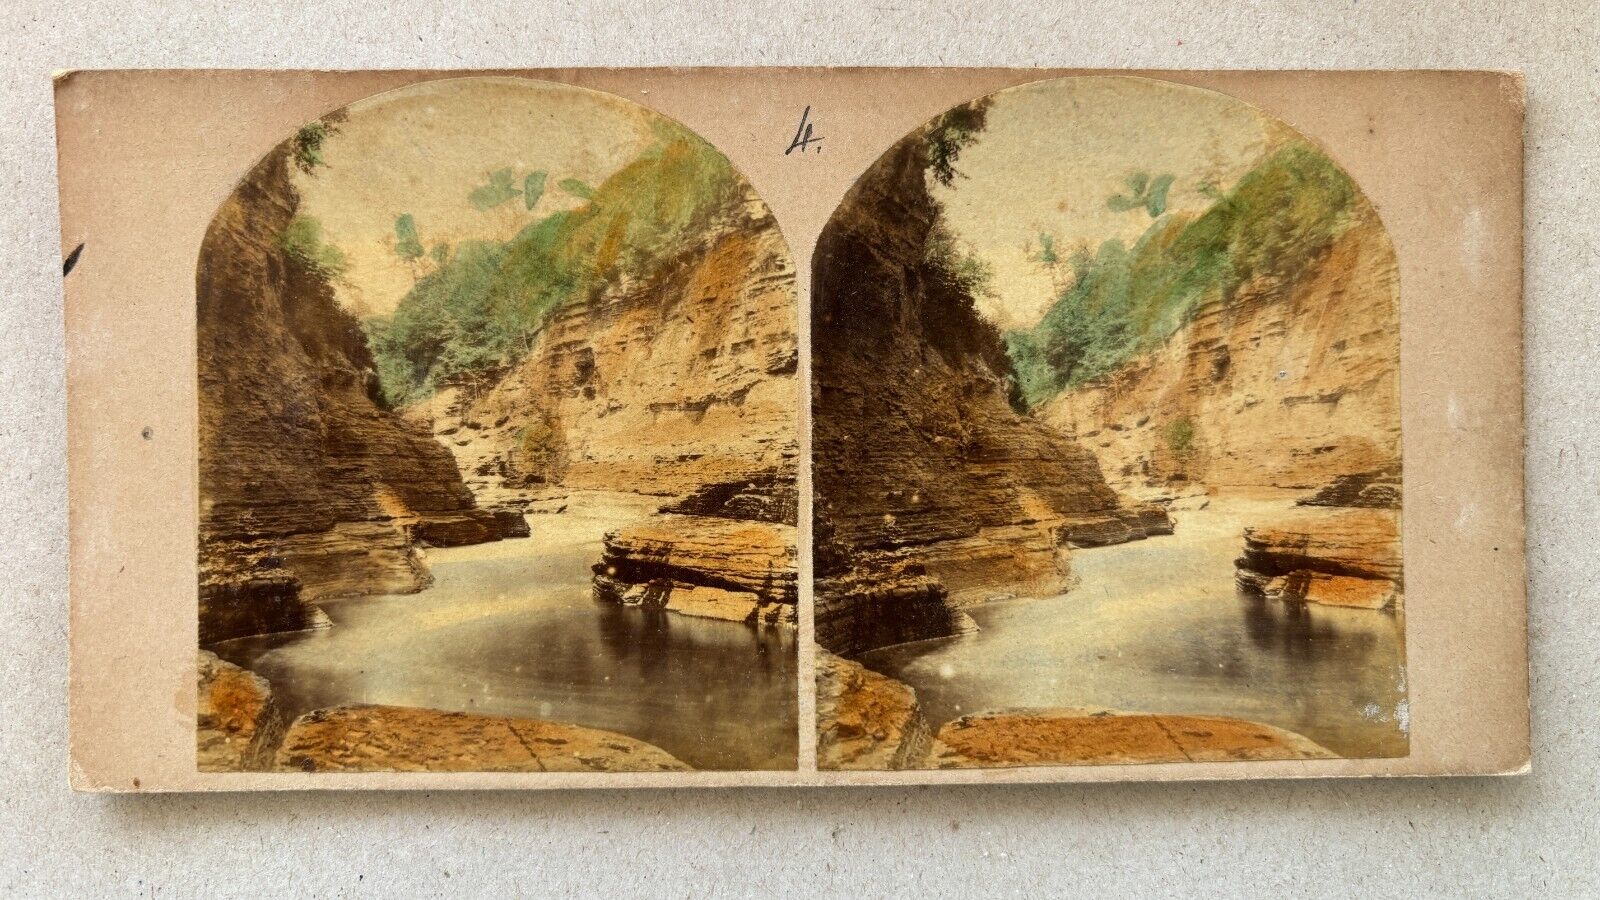 New York Stereoview Trenton Falls The Chasm by New York Stereoscopic Co c1859